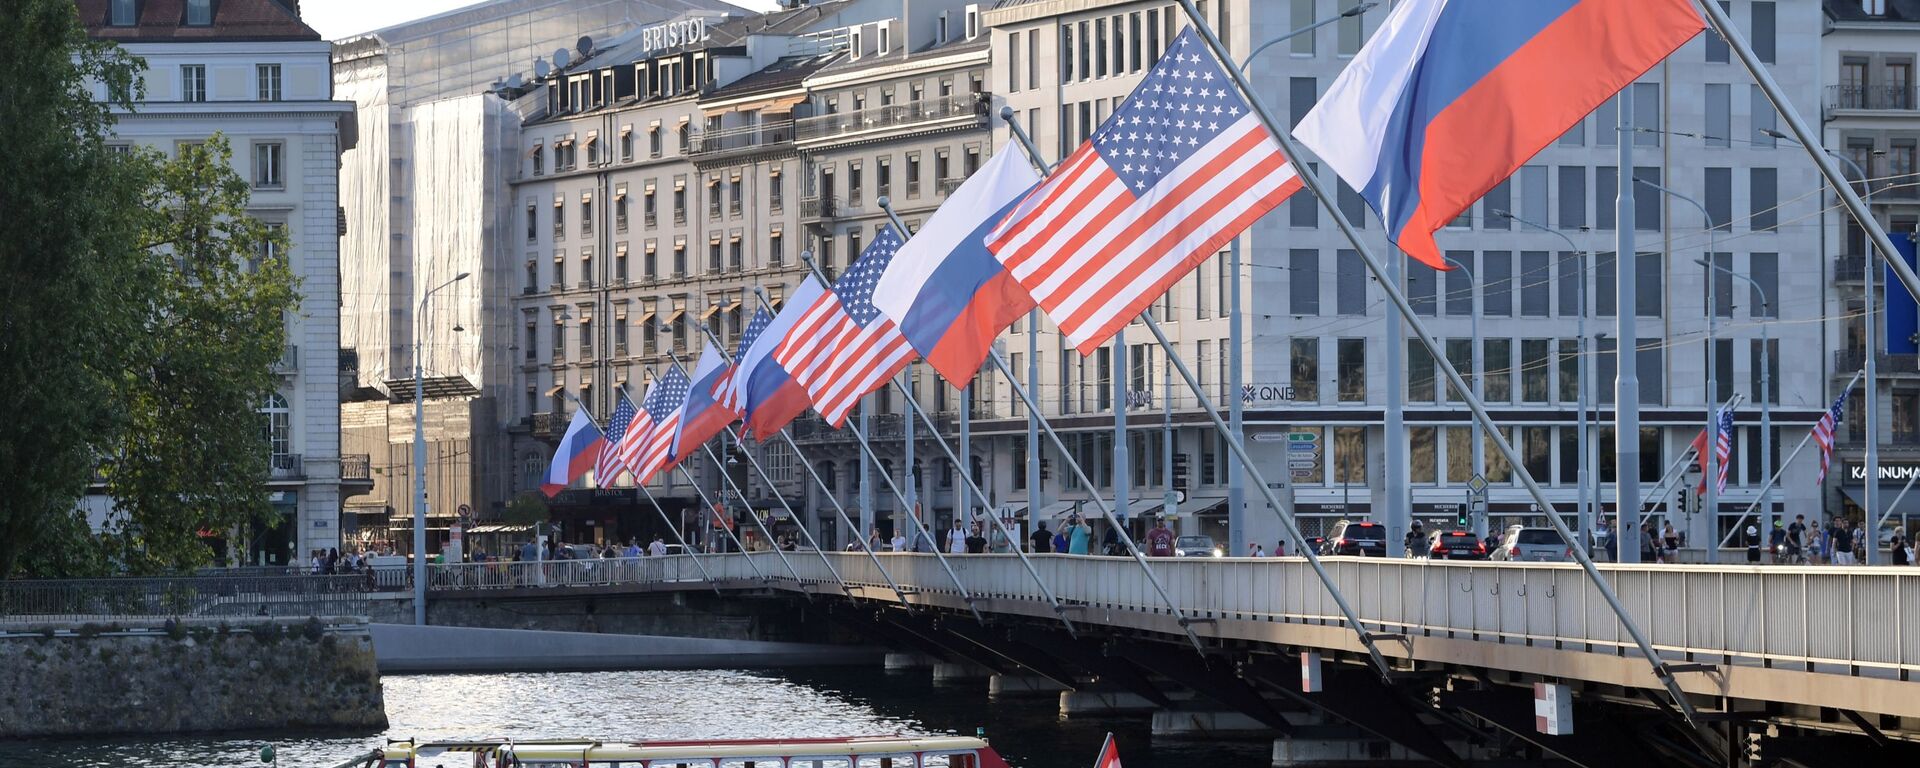 A view shows Mont-Blanc bridge decorated with flags of the USA and Russia ahead of the June 16 summit between U.S. President Joe Biden and Russian President Vladimir Putin, in Geneva, Switzerland - Sputnik International, 1920